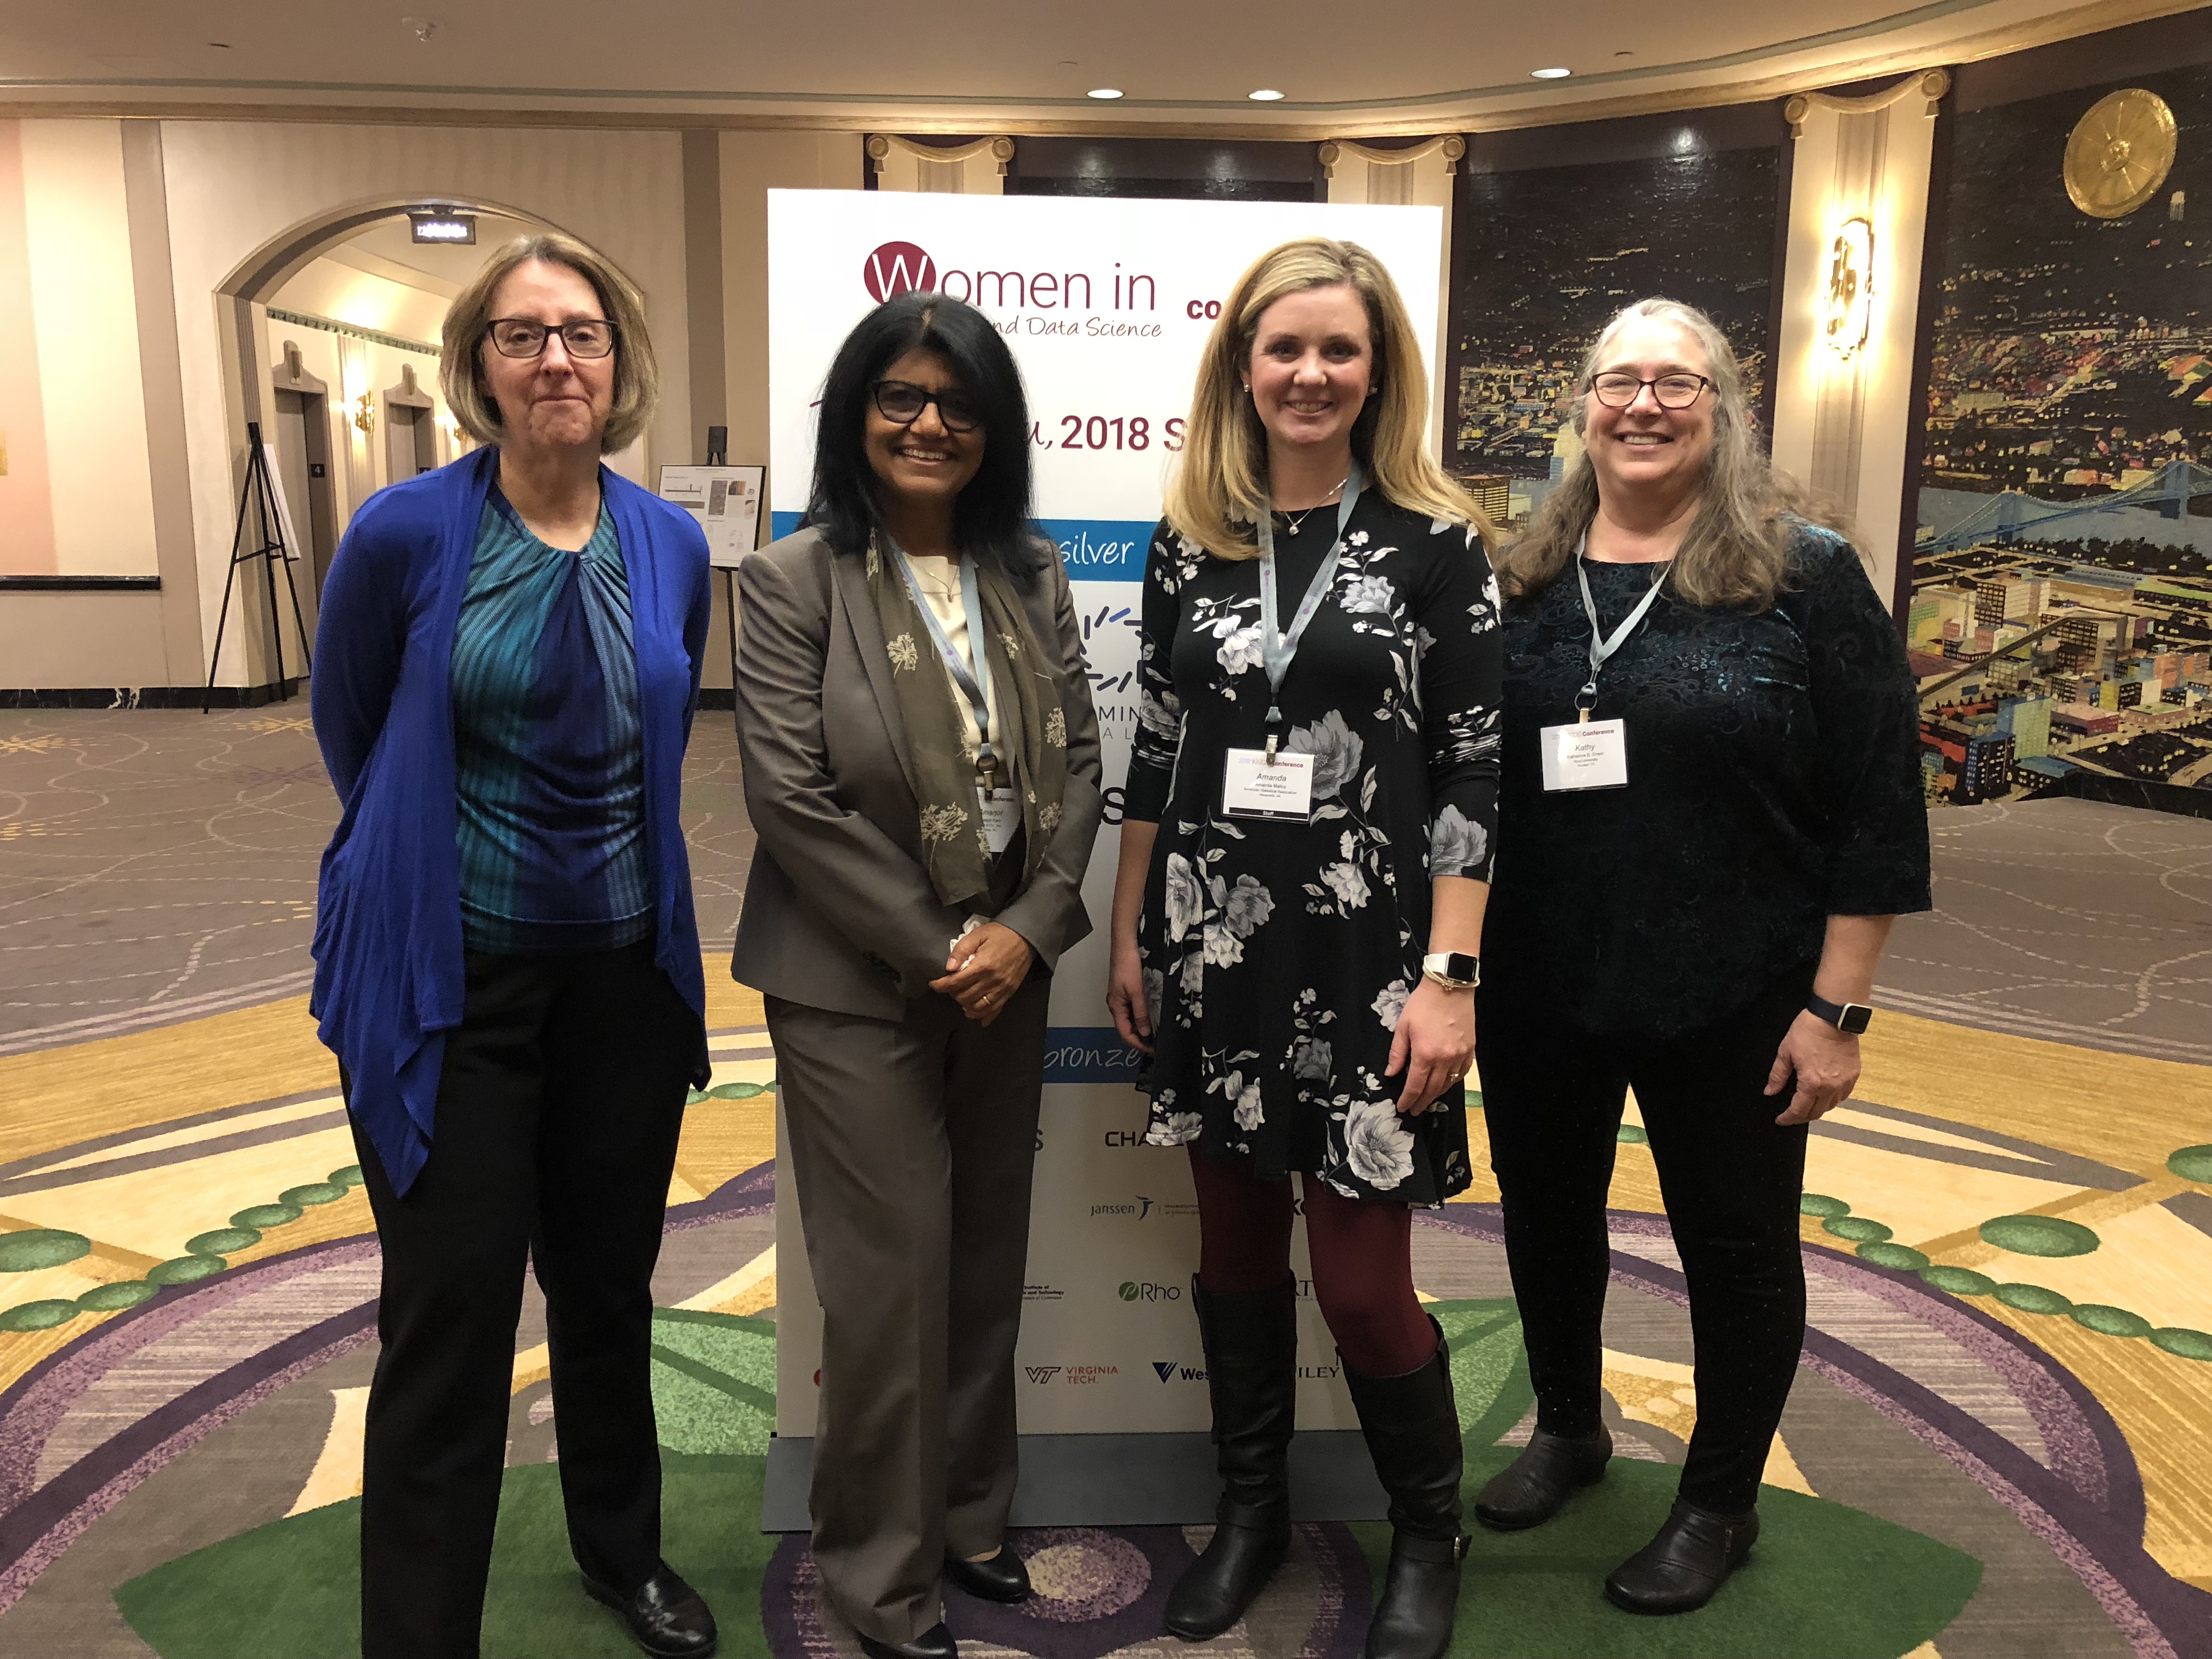 Eileen King, Amarjot Kaur, Amanda Malloy, and Kathy Ensor on ASA Giving Day, October 19, during the Women in Statistics and Data Science Conference in Cincinnati, Ohio 